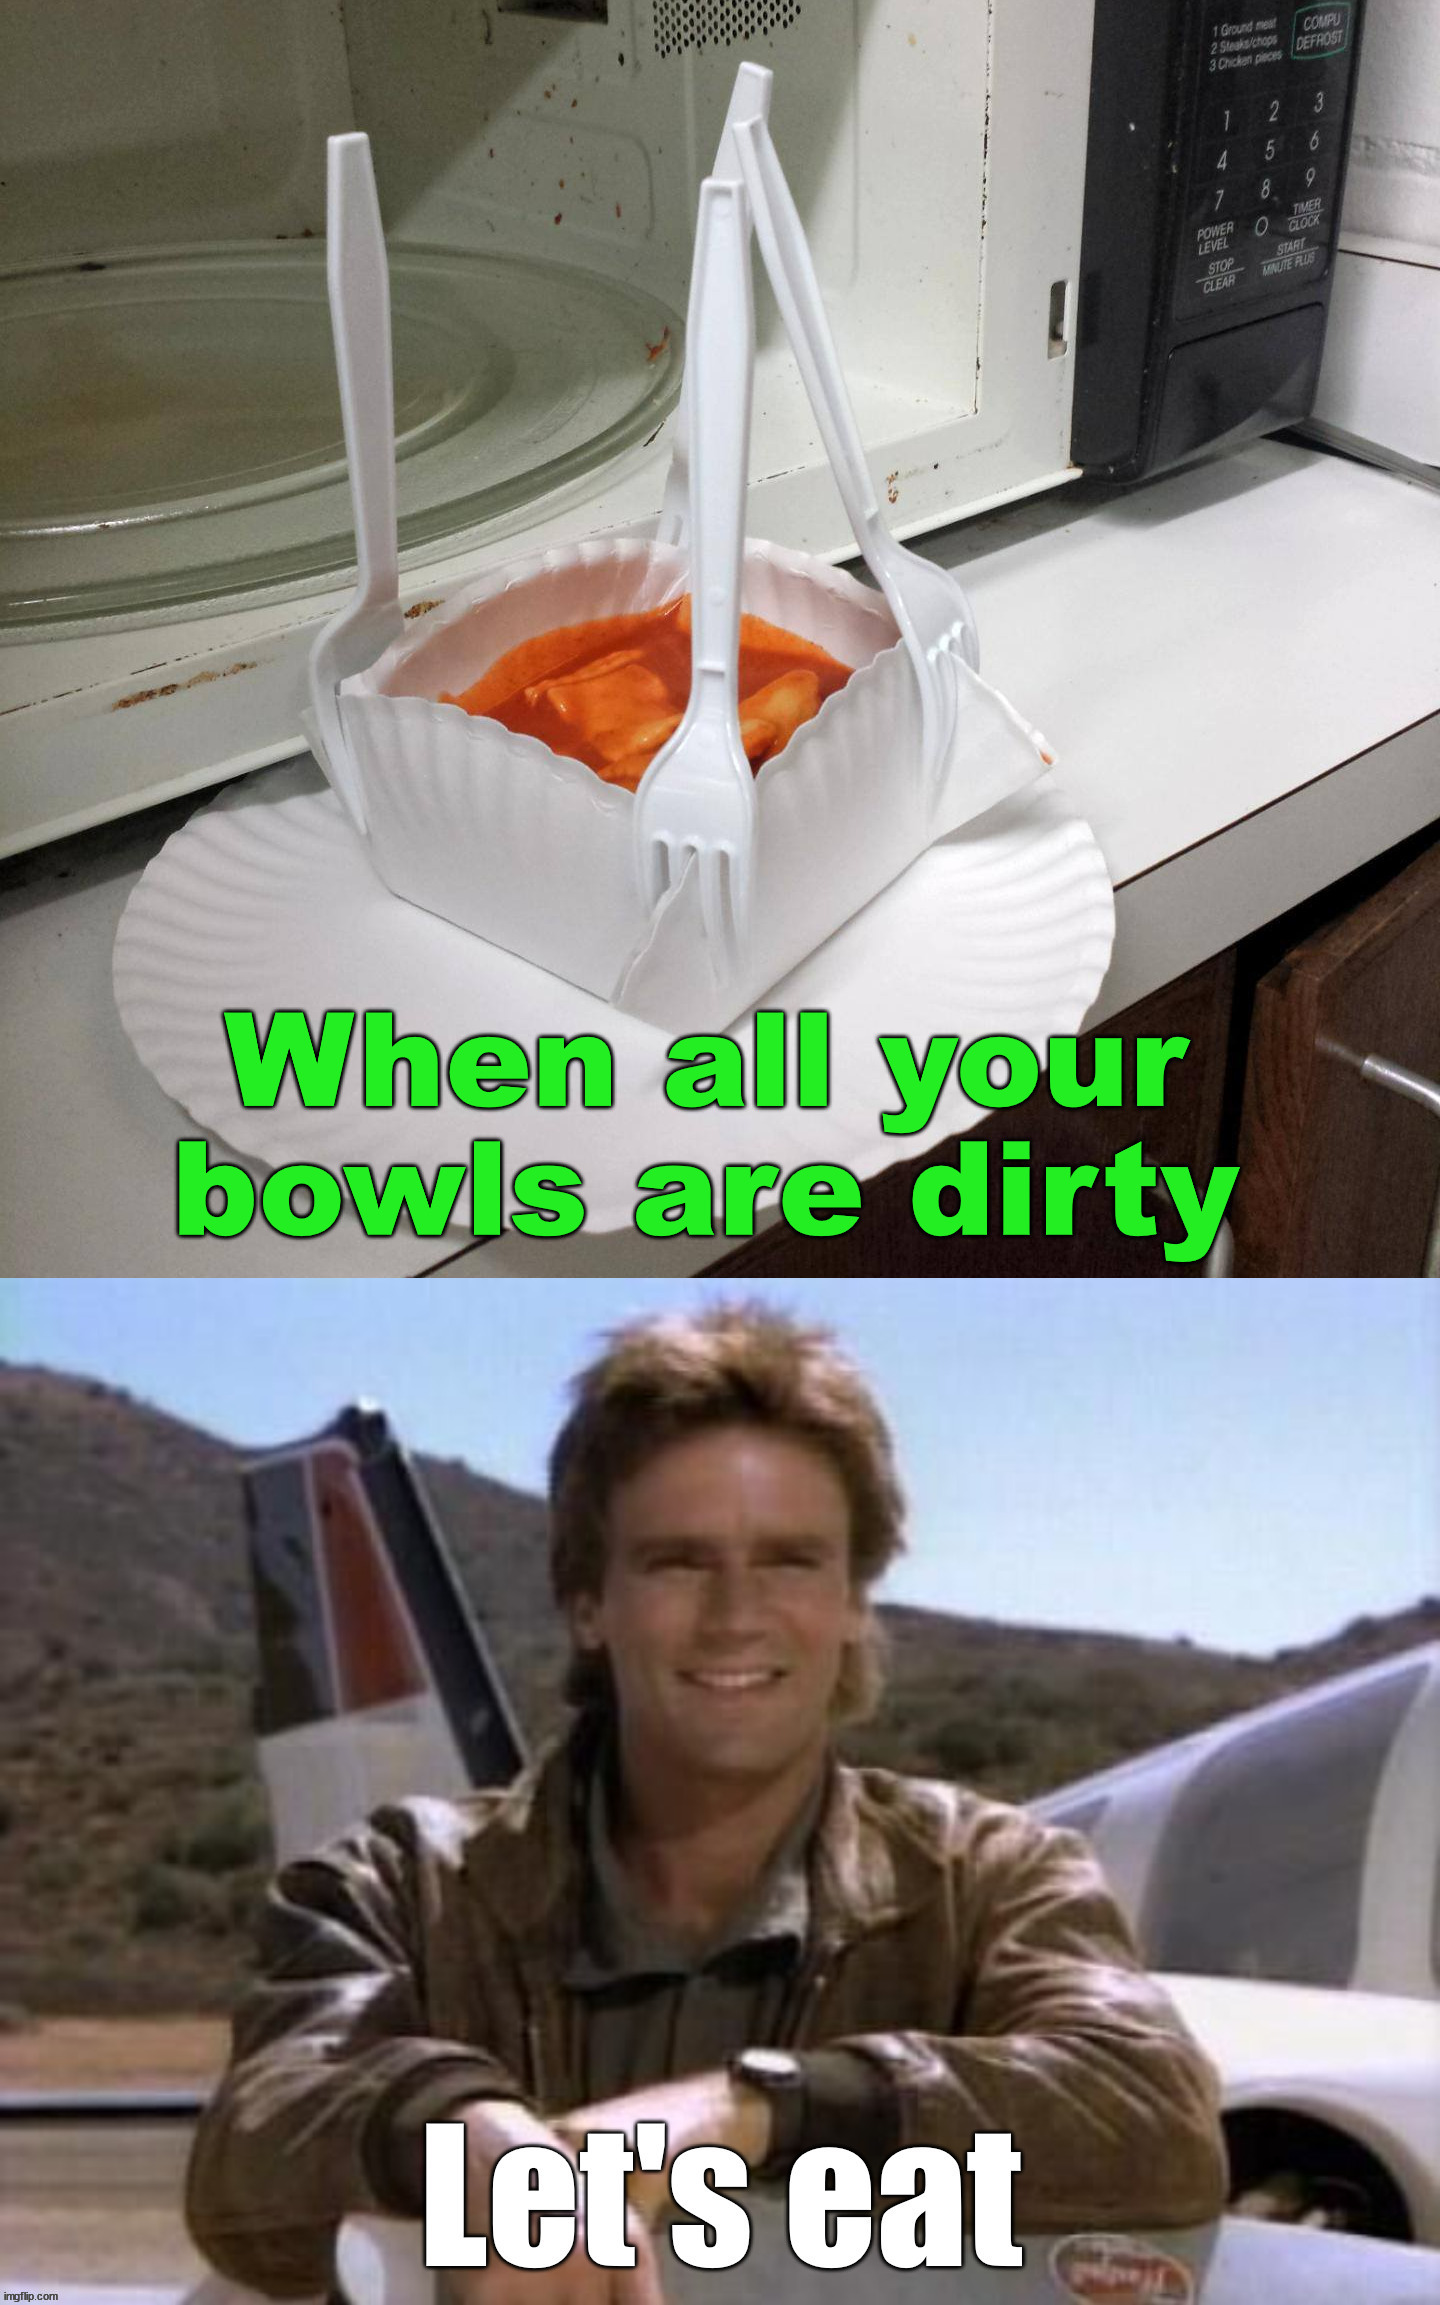 Some MacGyver kinda thing | image tagged in macgyver,smart | made w/ Imgflip meme maker